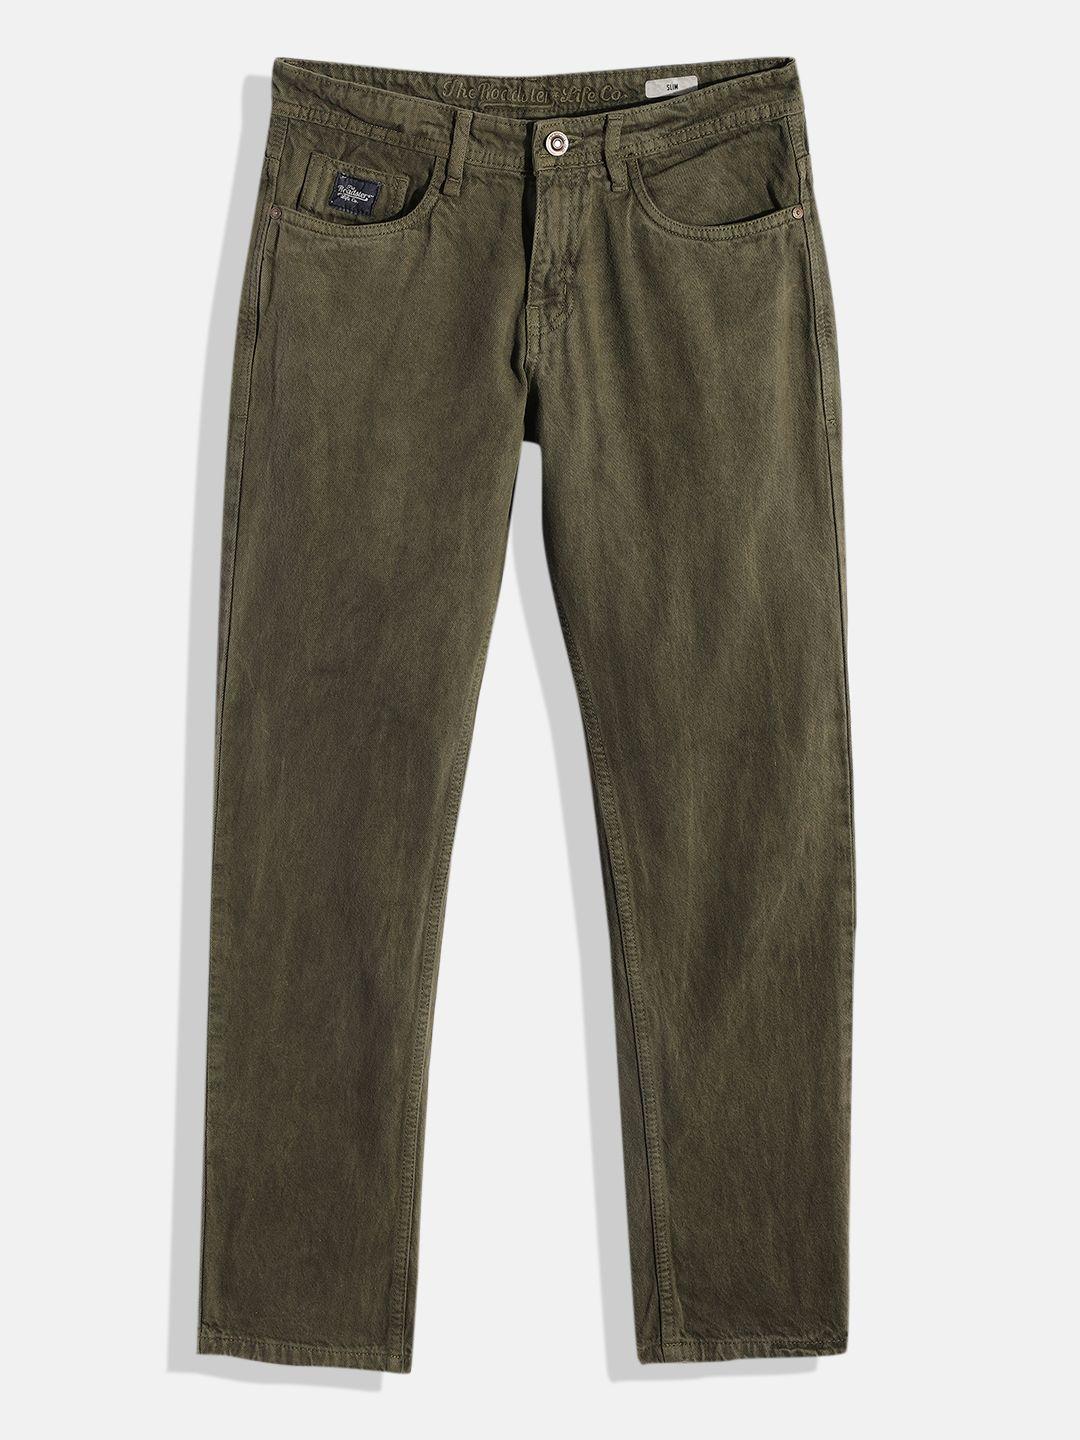 uth by roadster boys olive green slim fit stretchable jeans